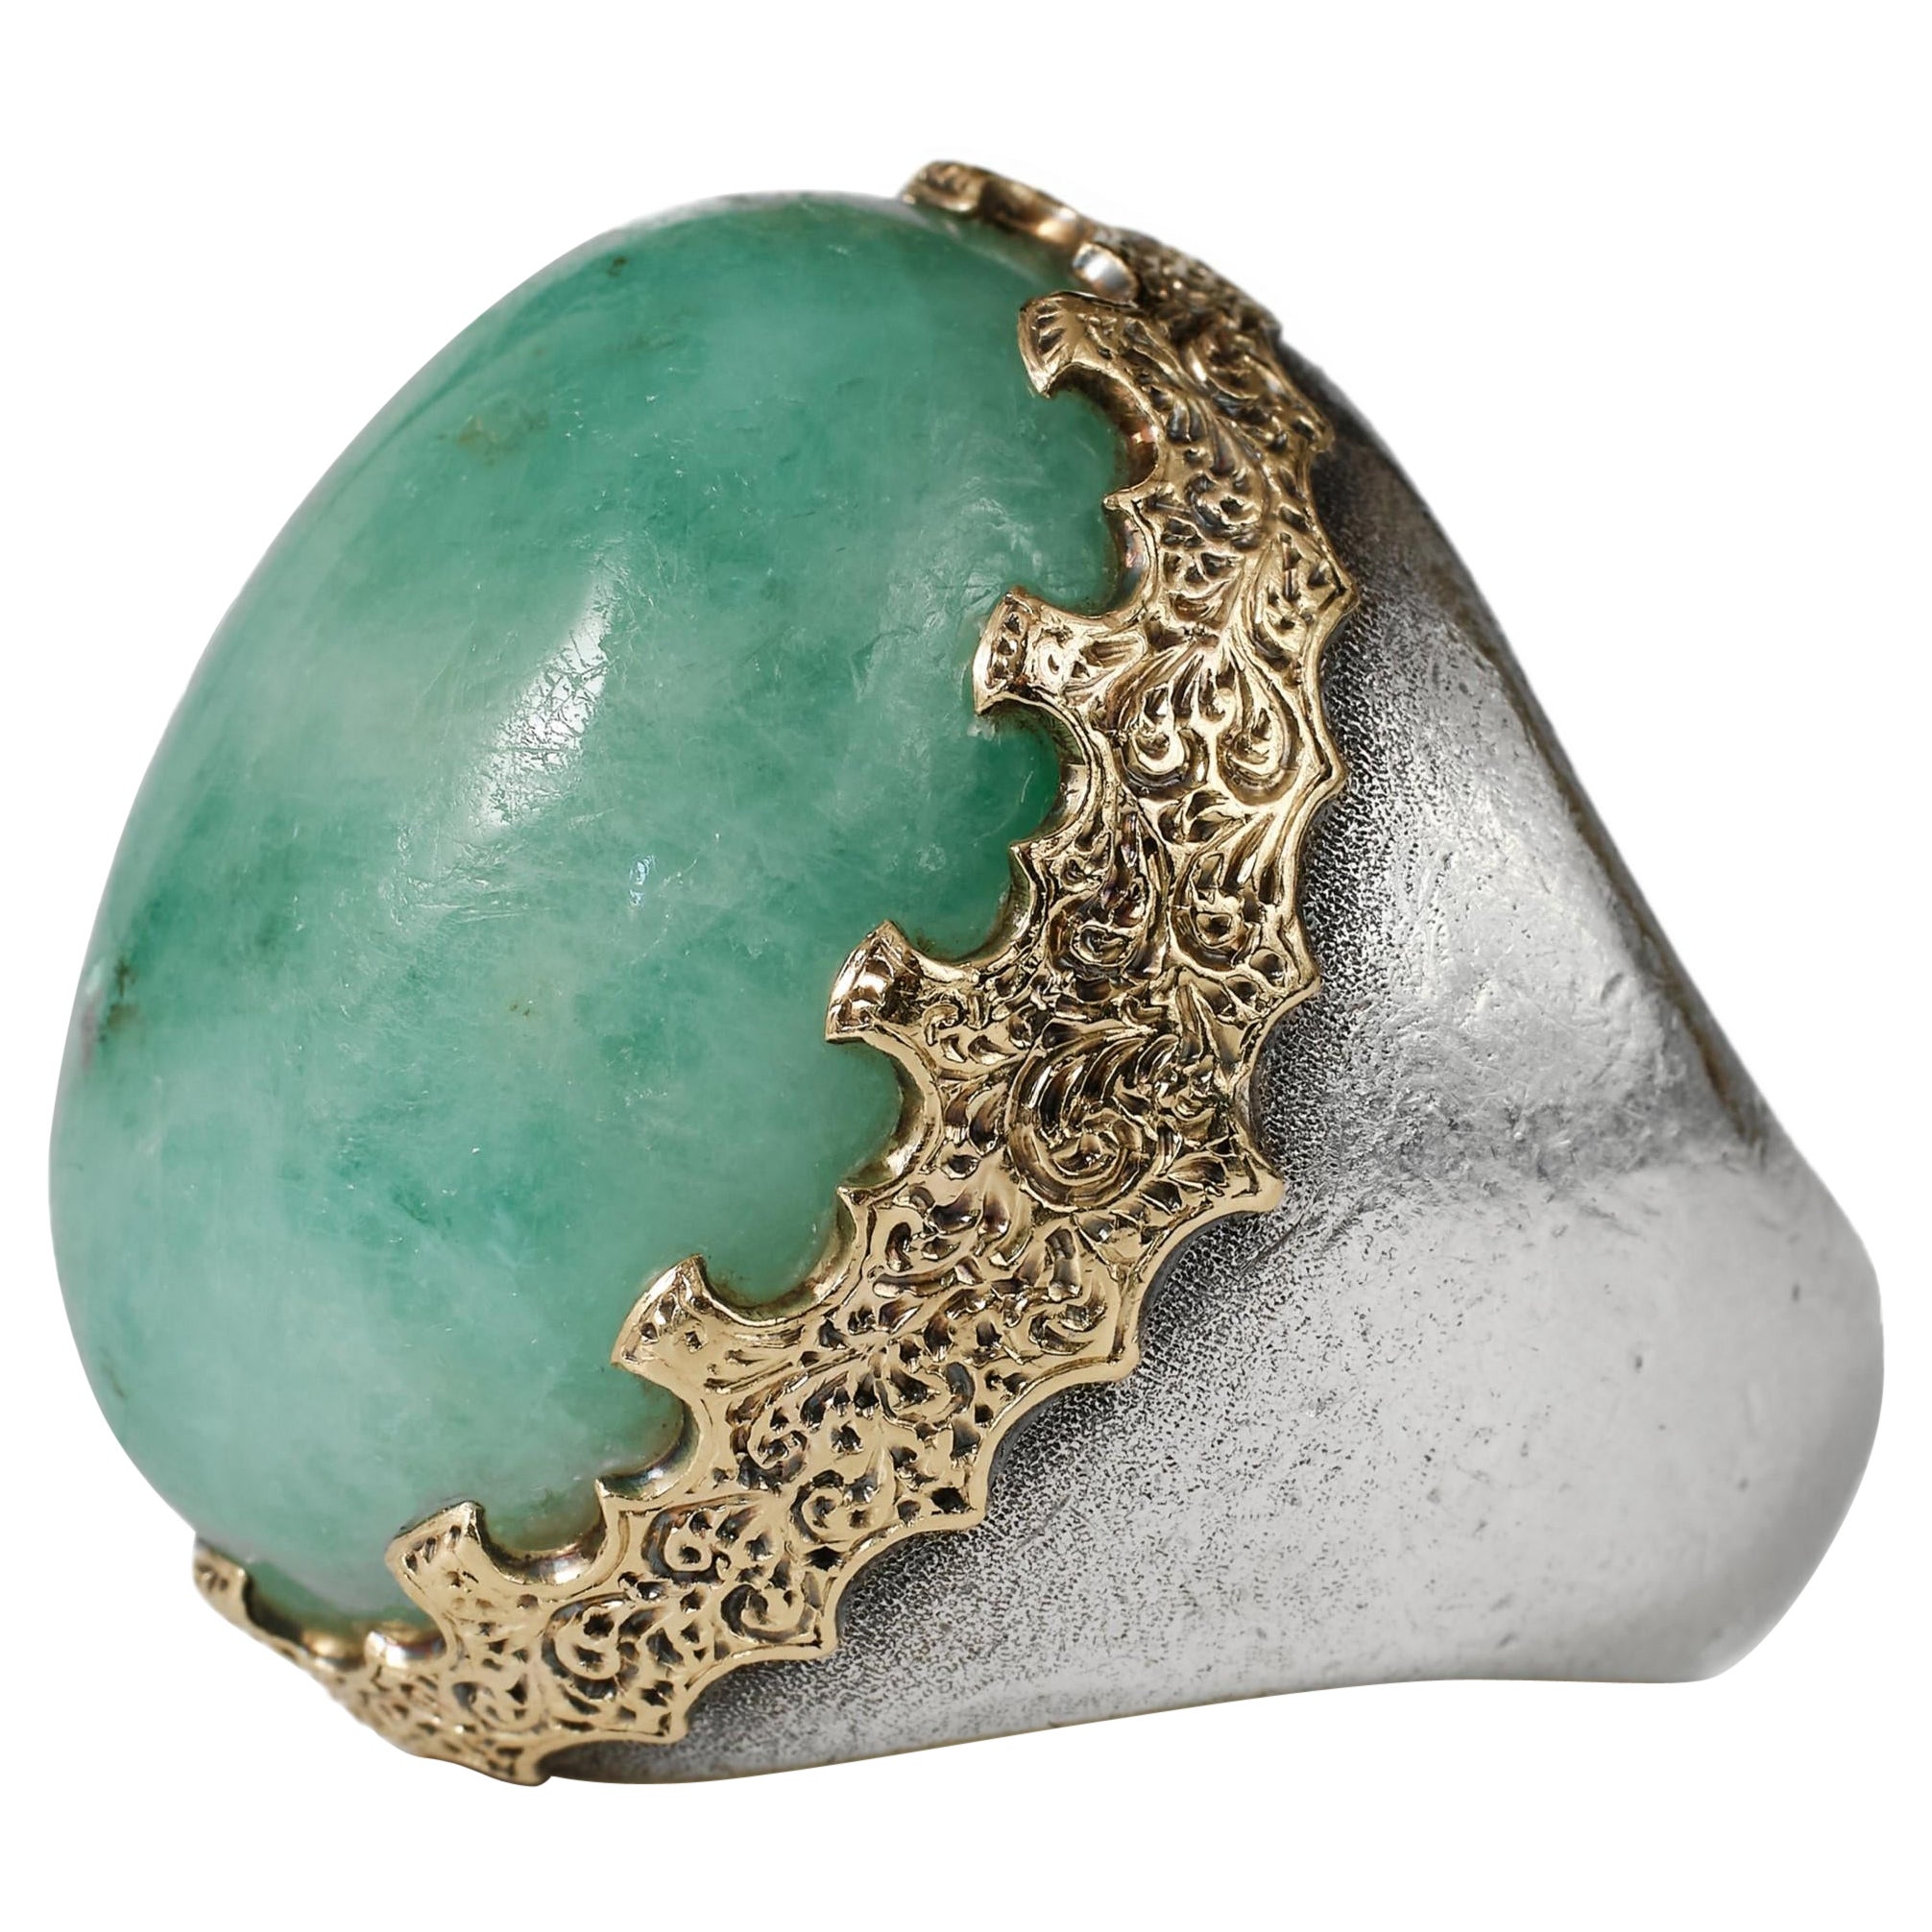 Vintage 1960s Mario Buccellati ring with 39 carat jade nephrite For Sale